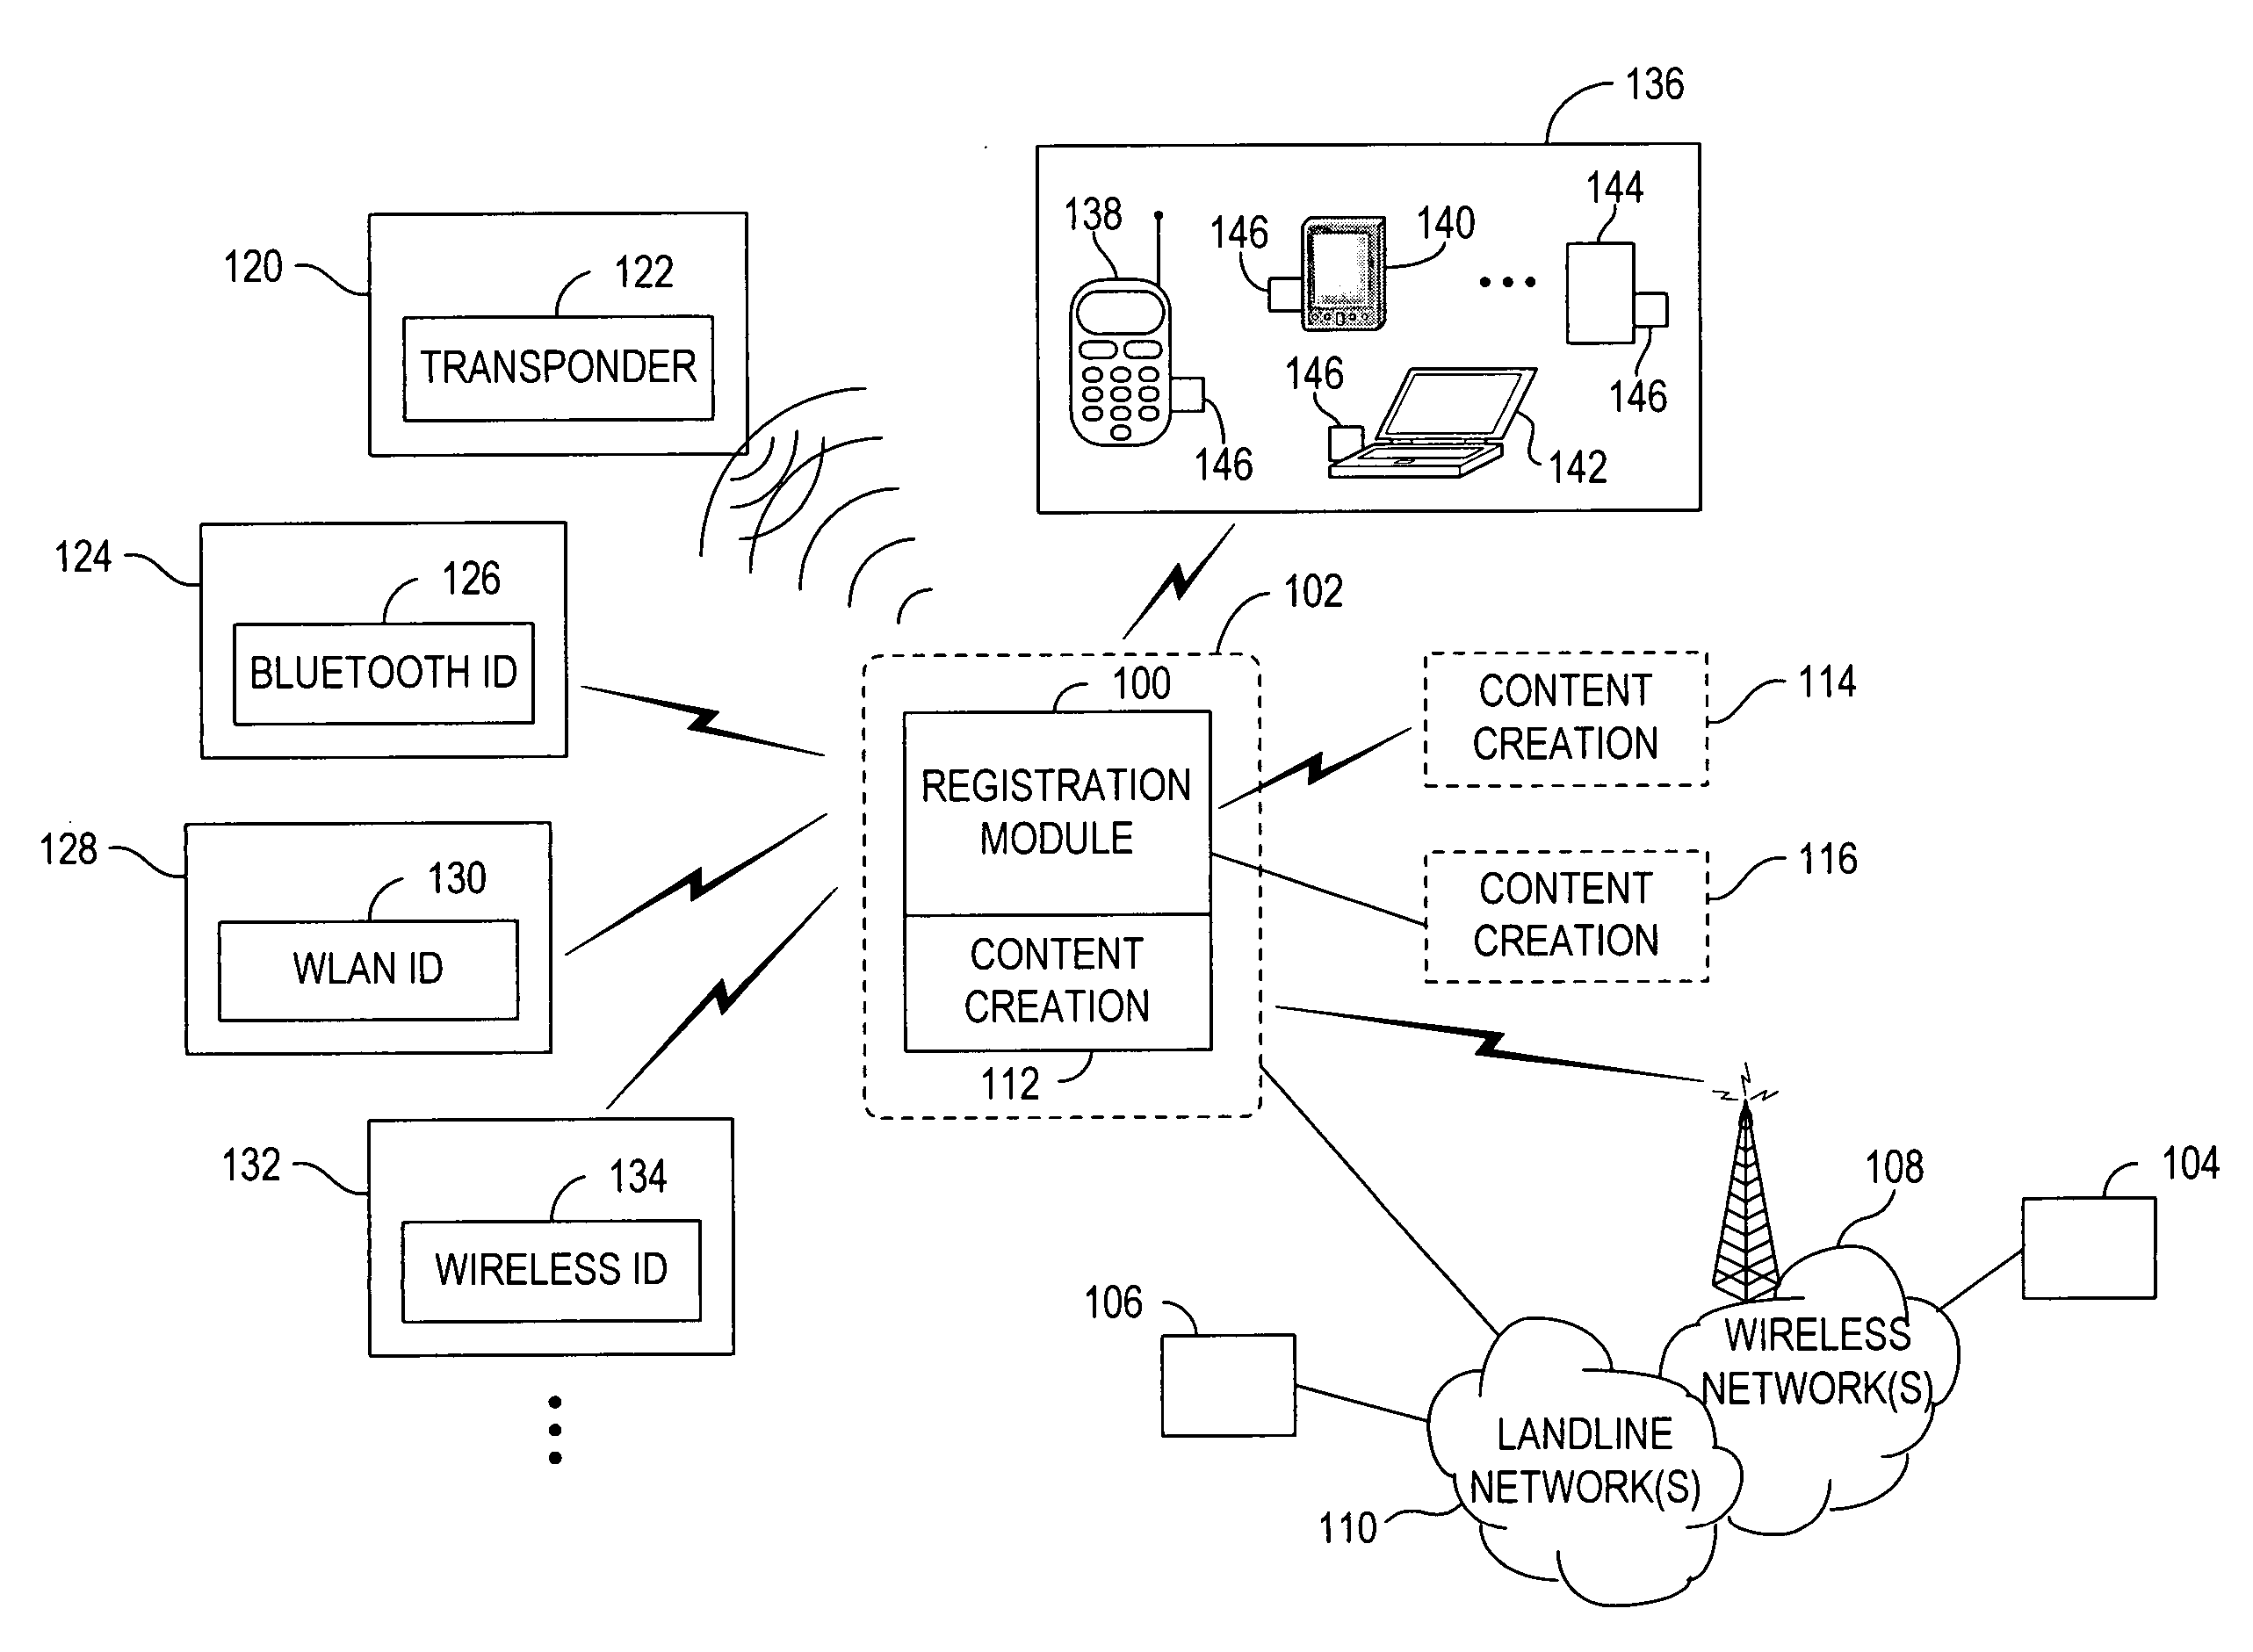 System and method for registering attendance of entities associated with content creation